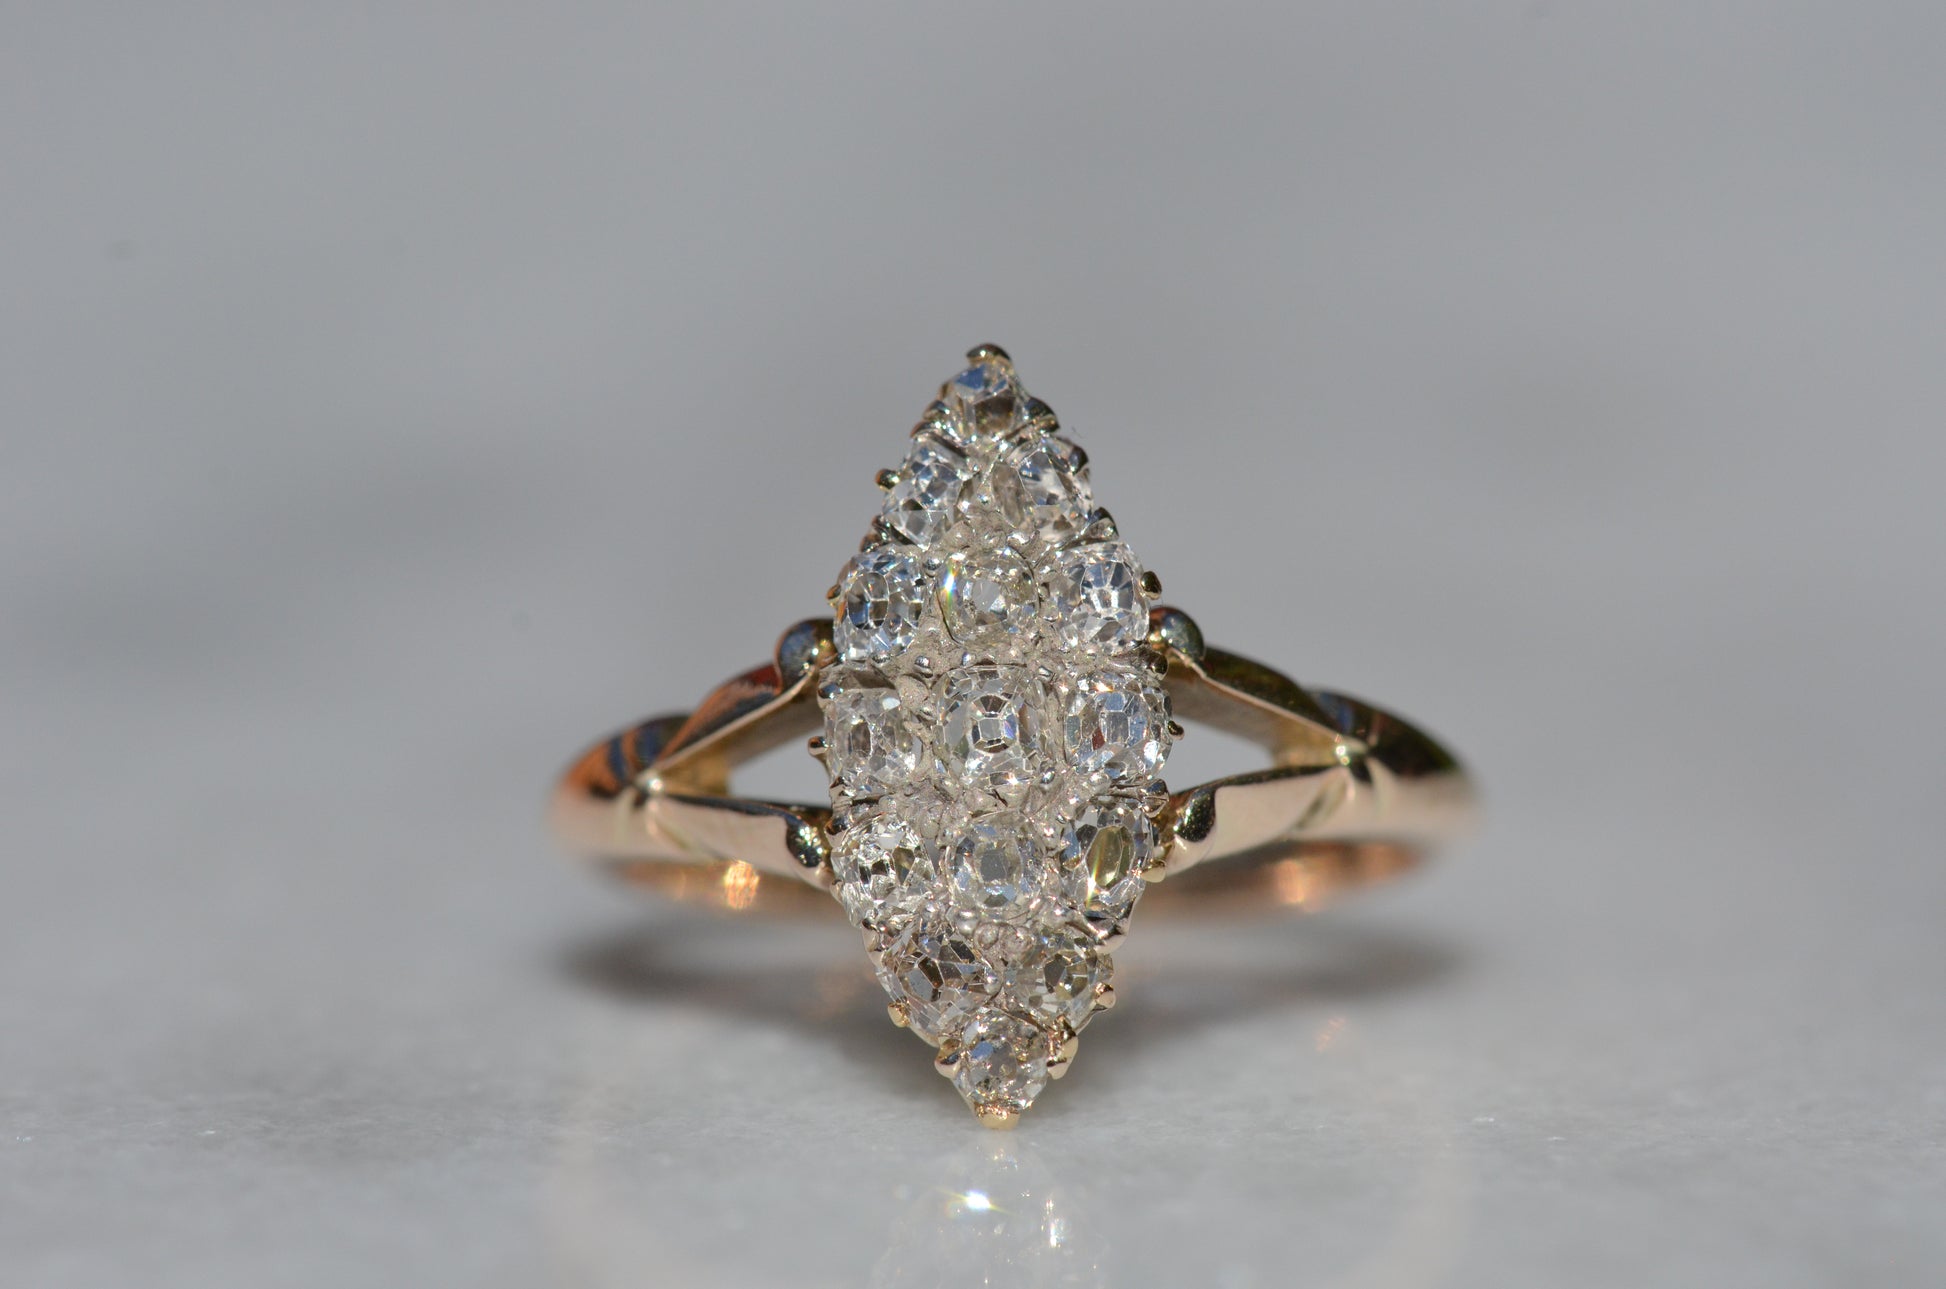 The closely cropped macro of this Victorian diamond navette ring is photographed head-on to show the detail of the face and clear diamond faceting.